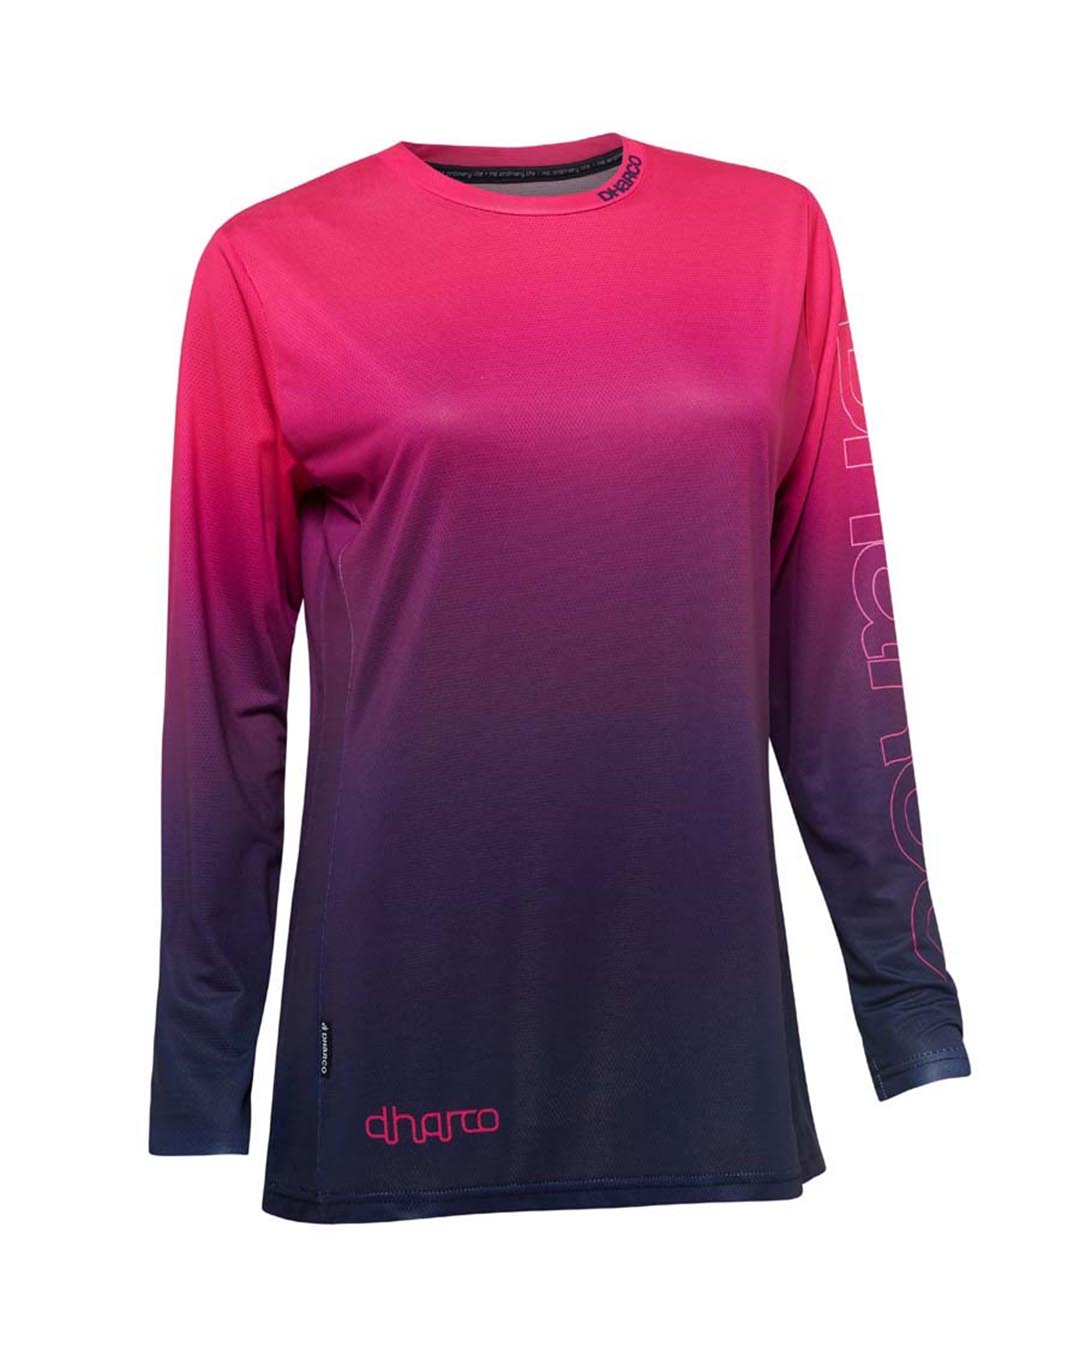 Womens Race Jersey  Fort Bill - DHaRCO Clothing